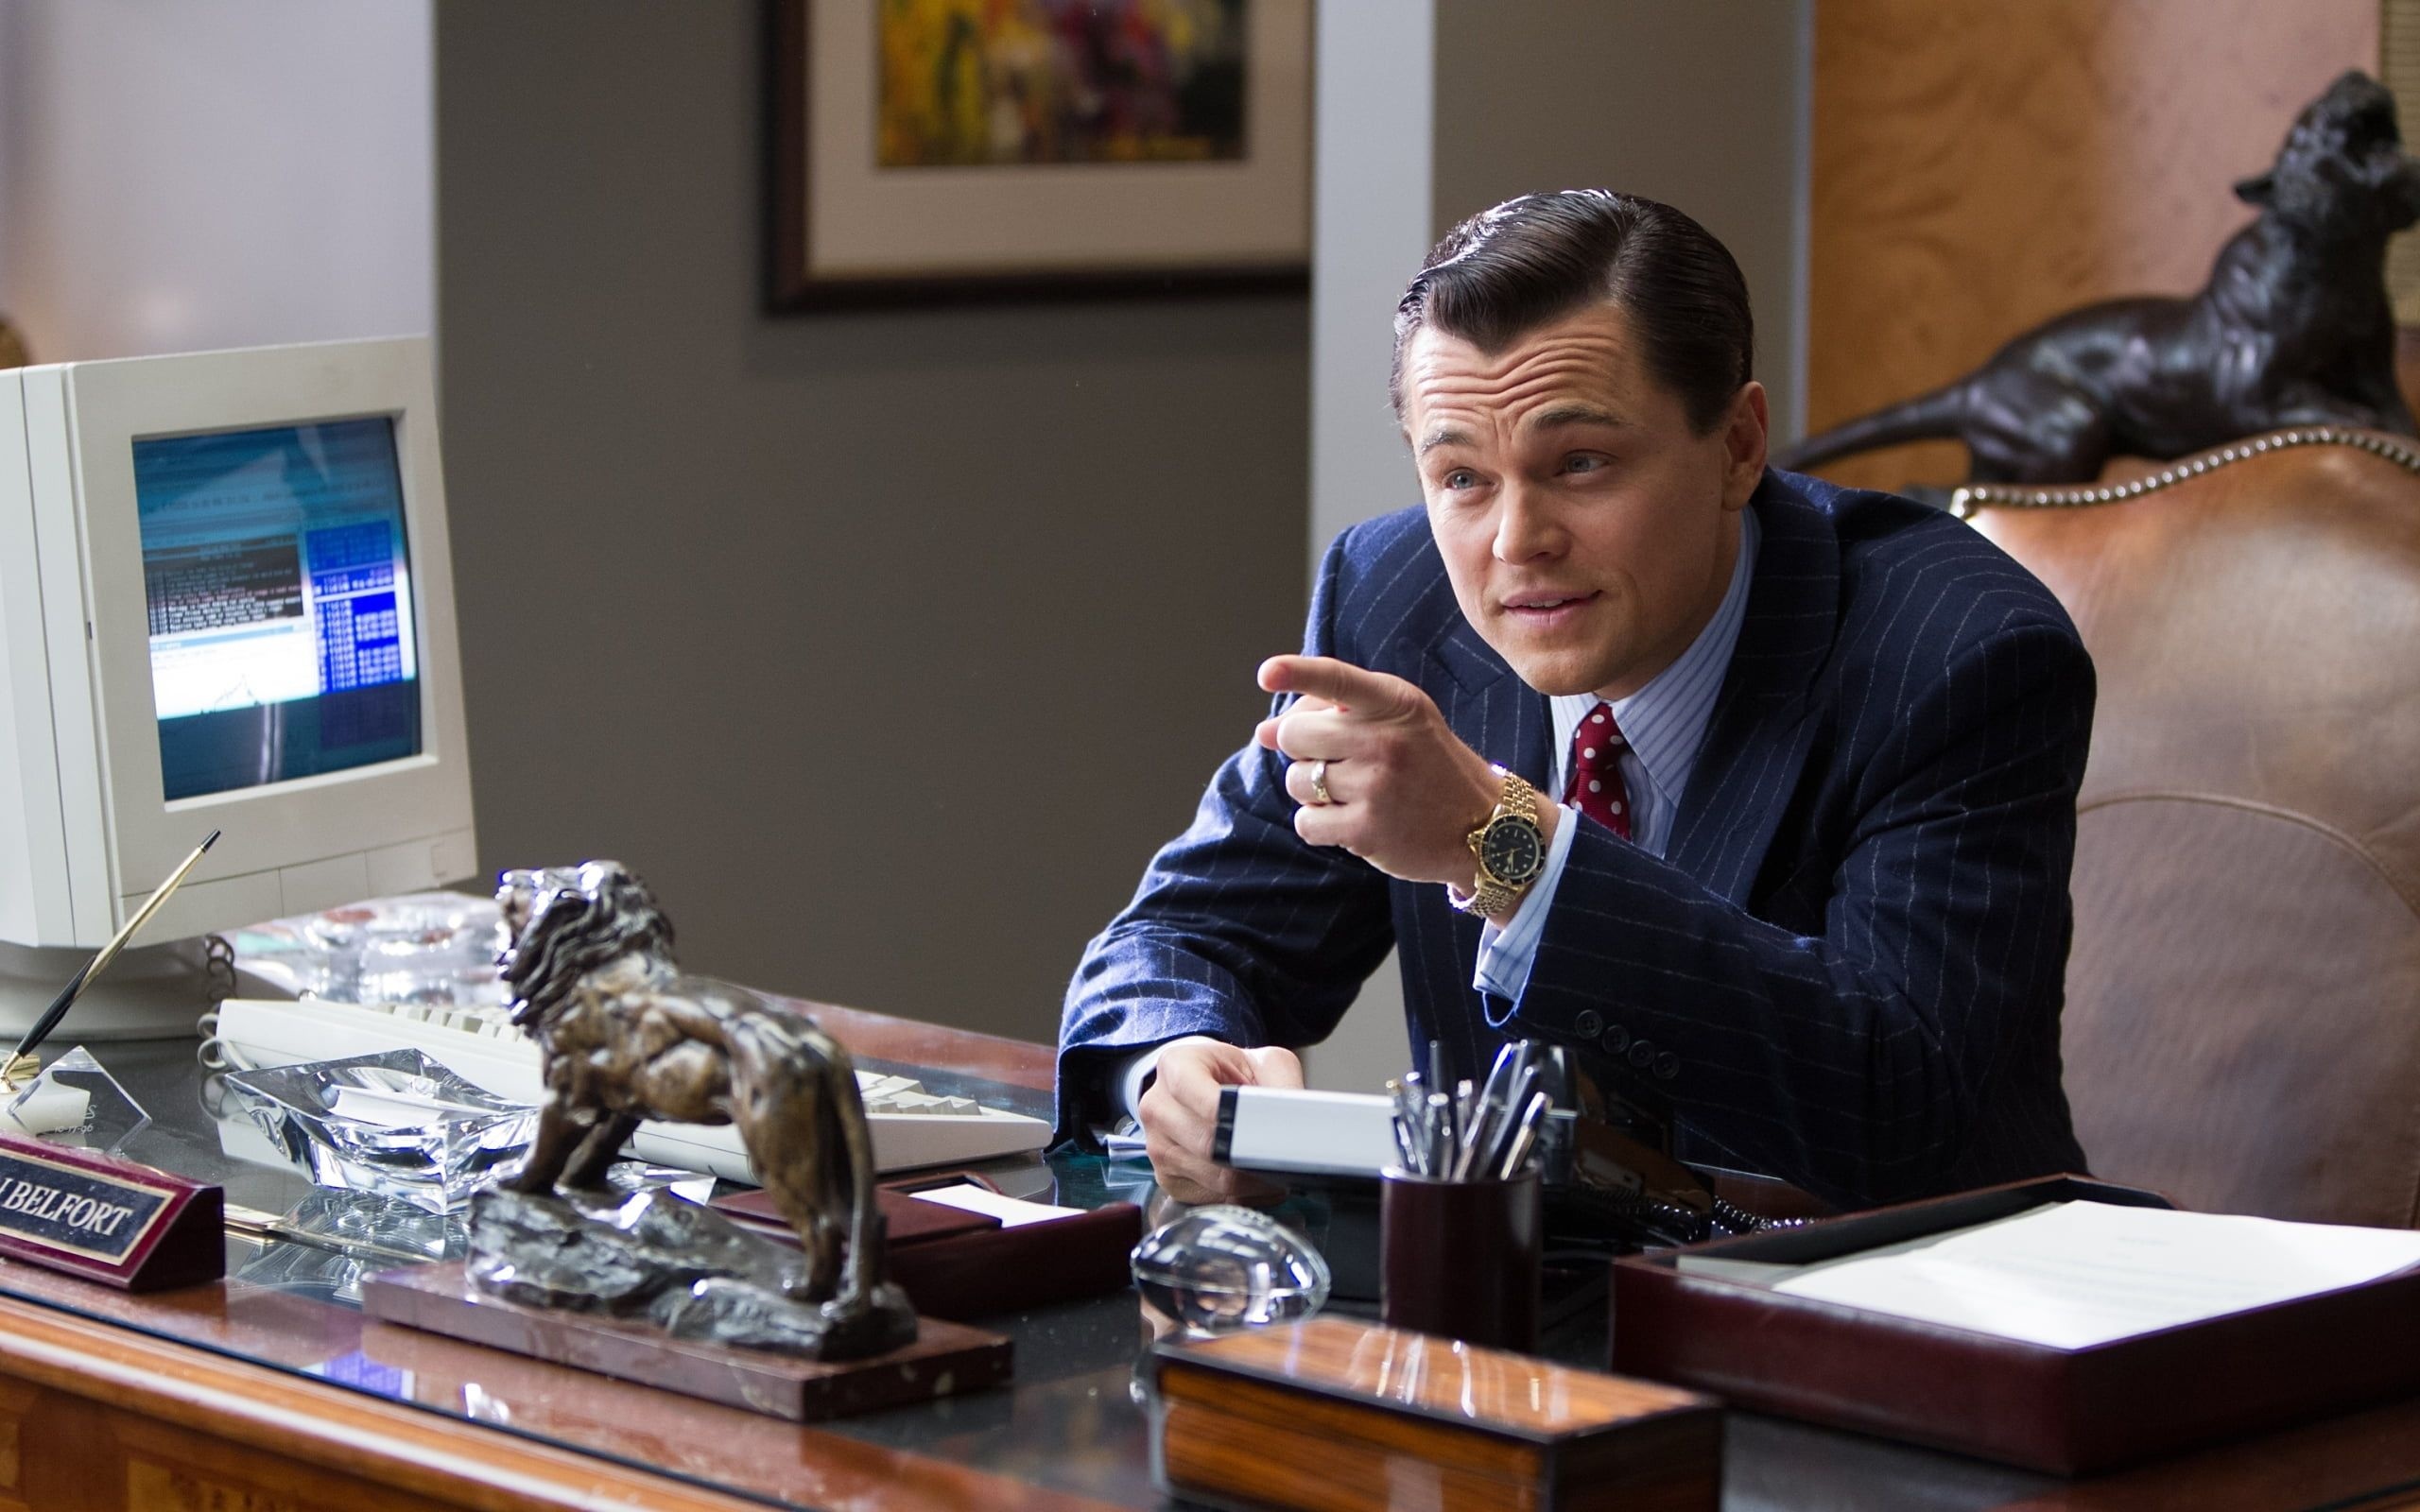 311901 2560x1600 desktop hd the wolf of wall street background image